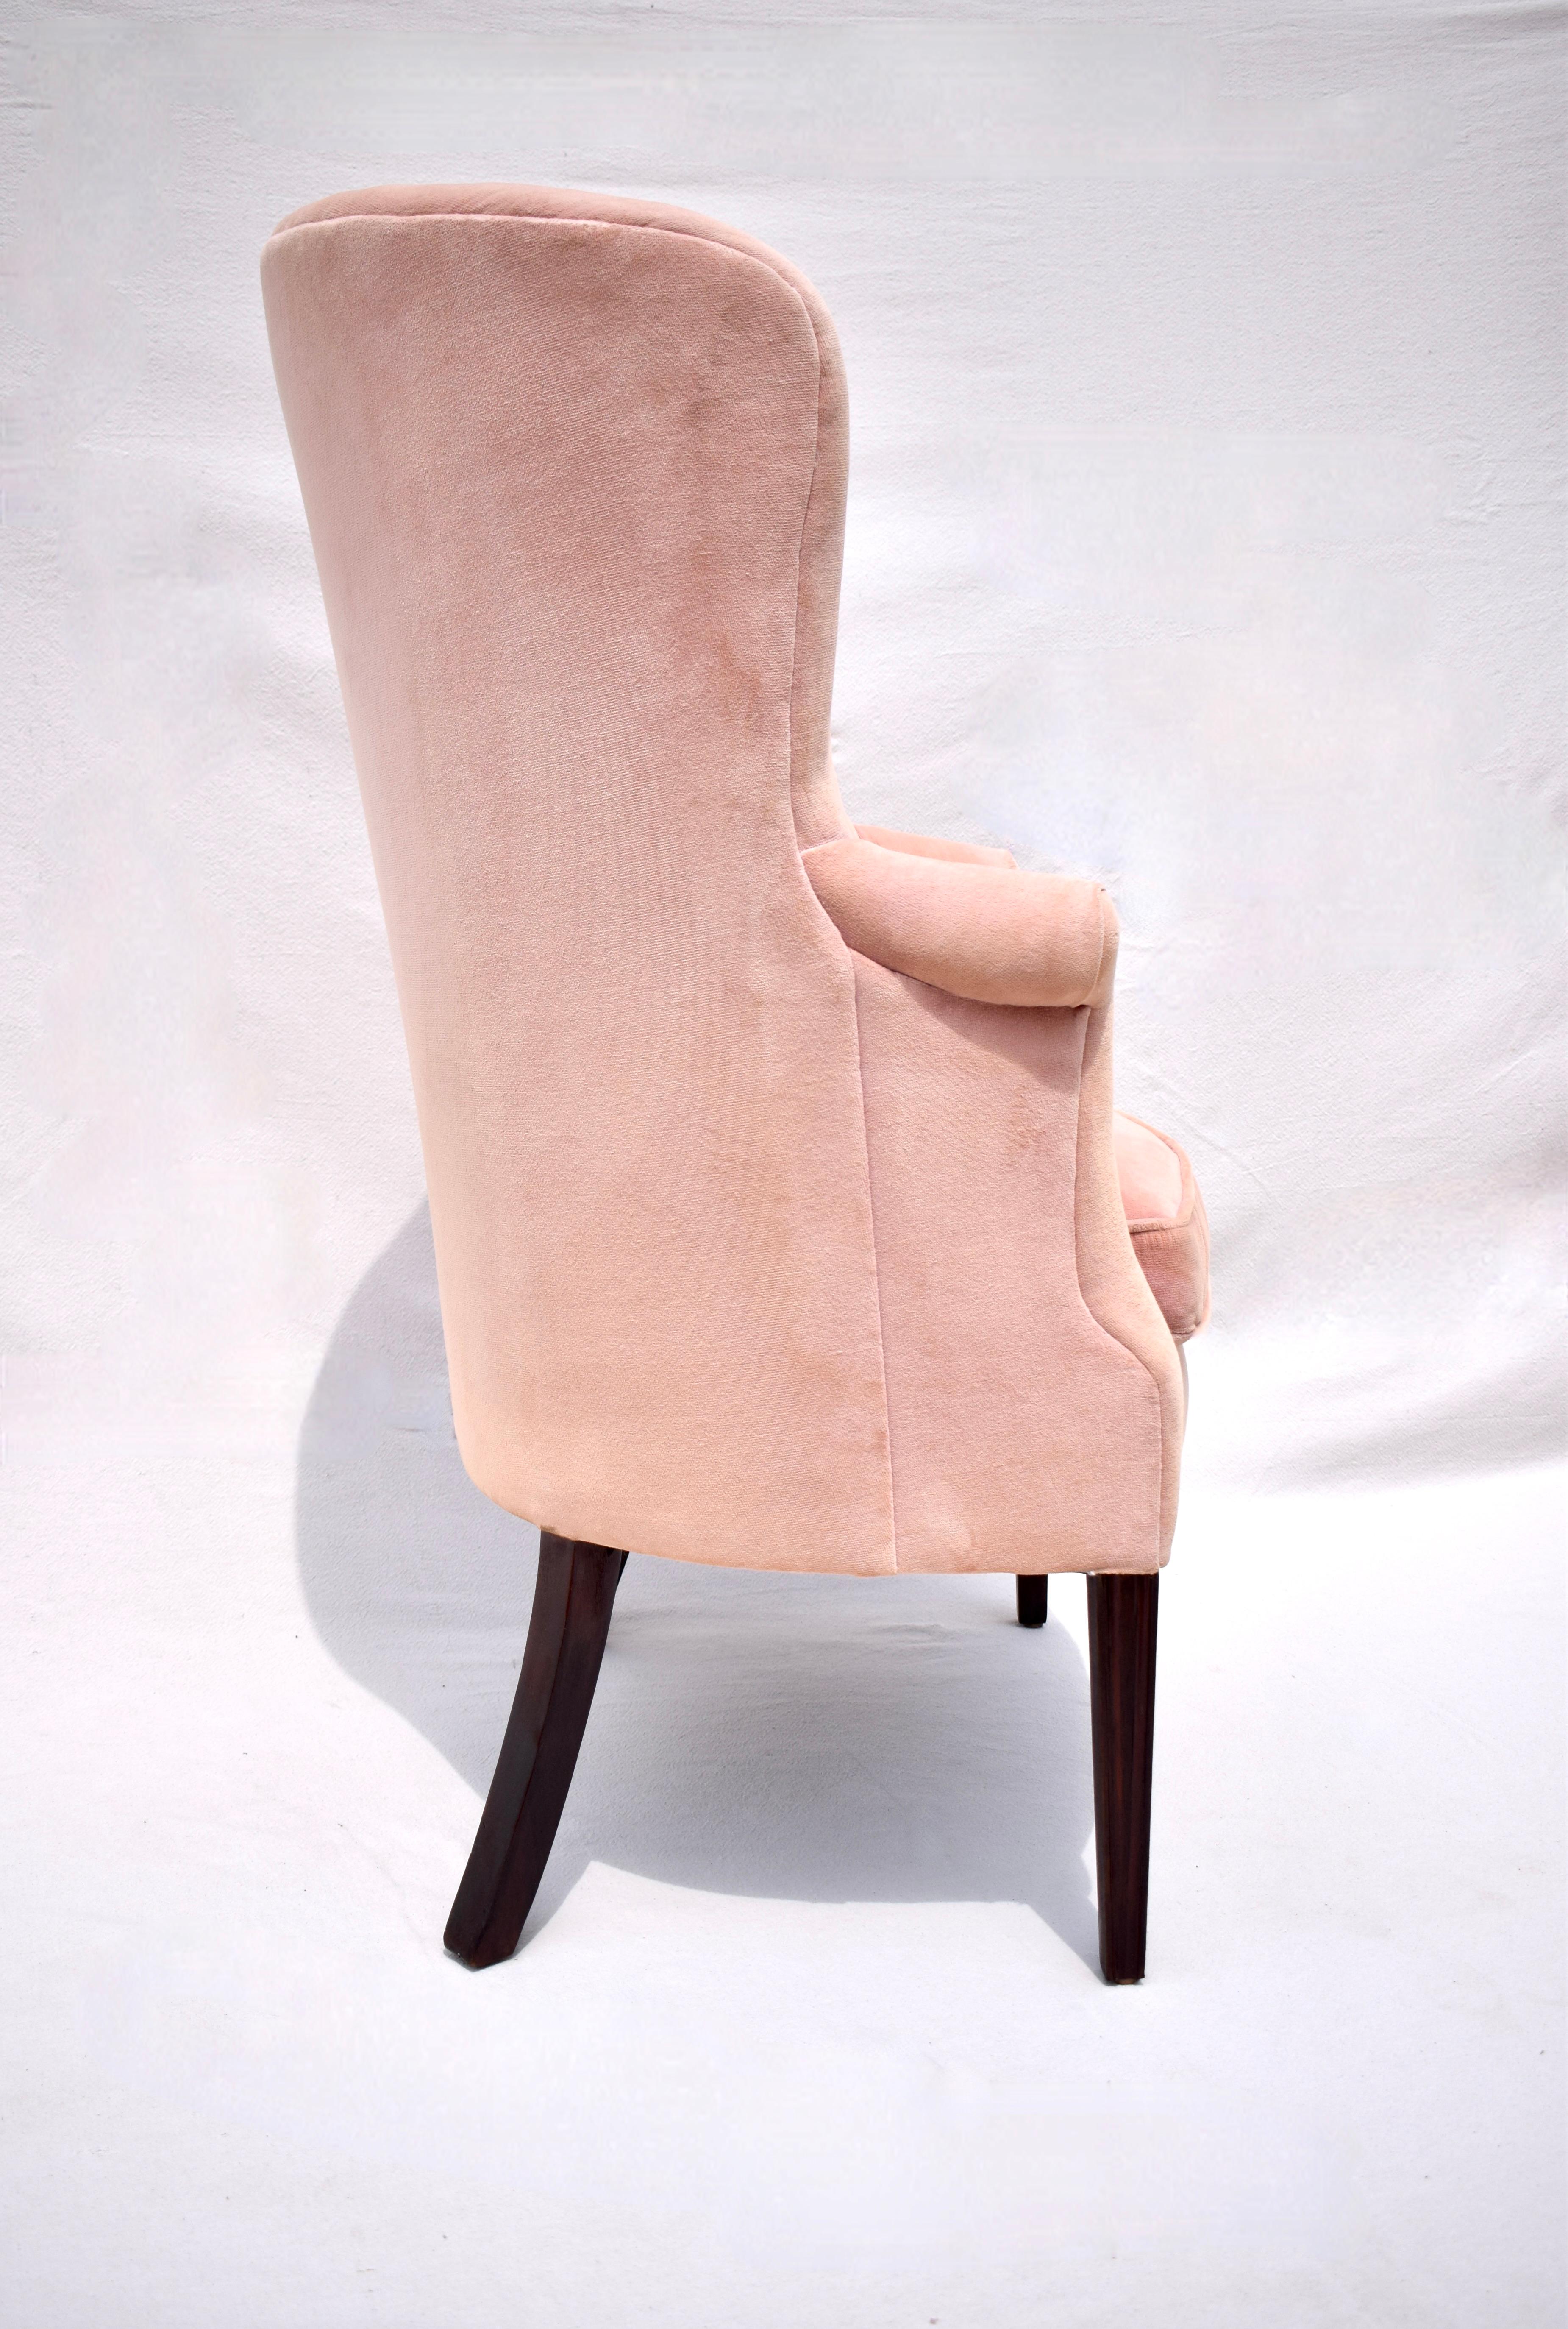 wingback chair pink